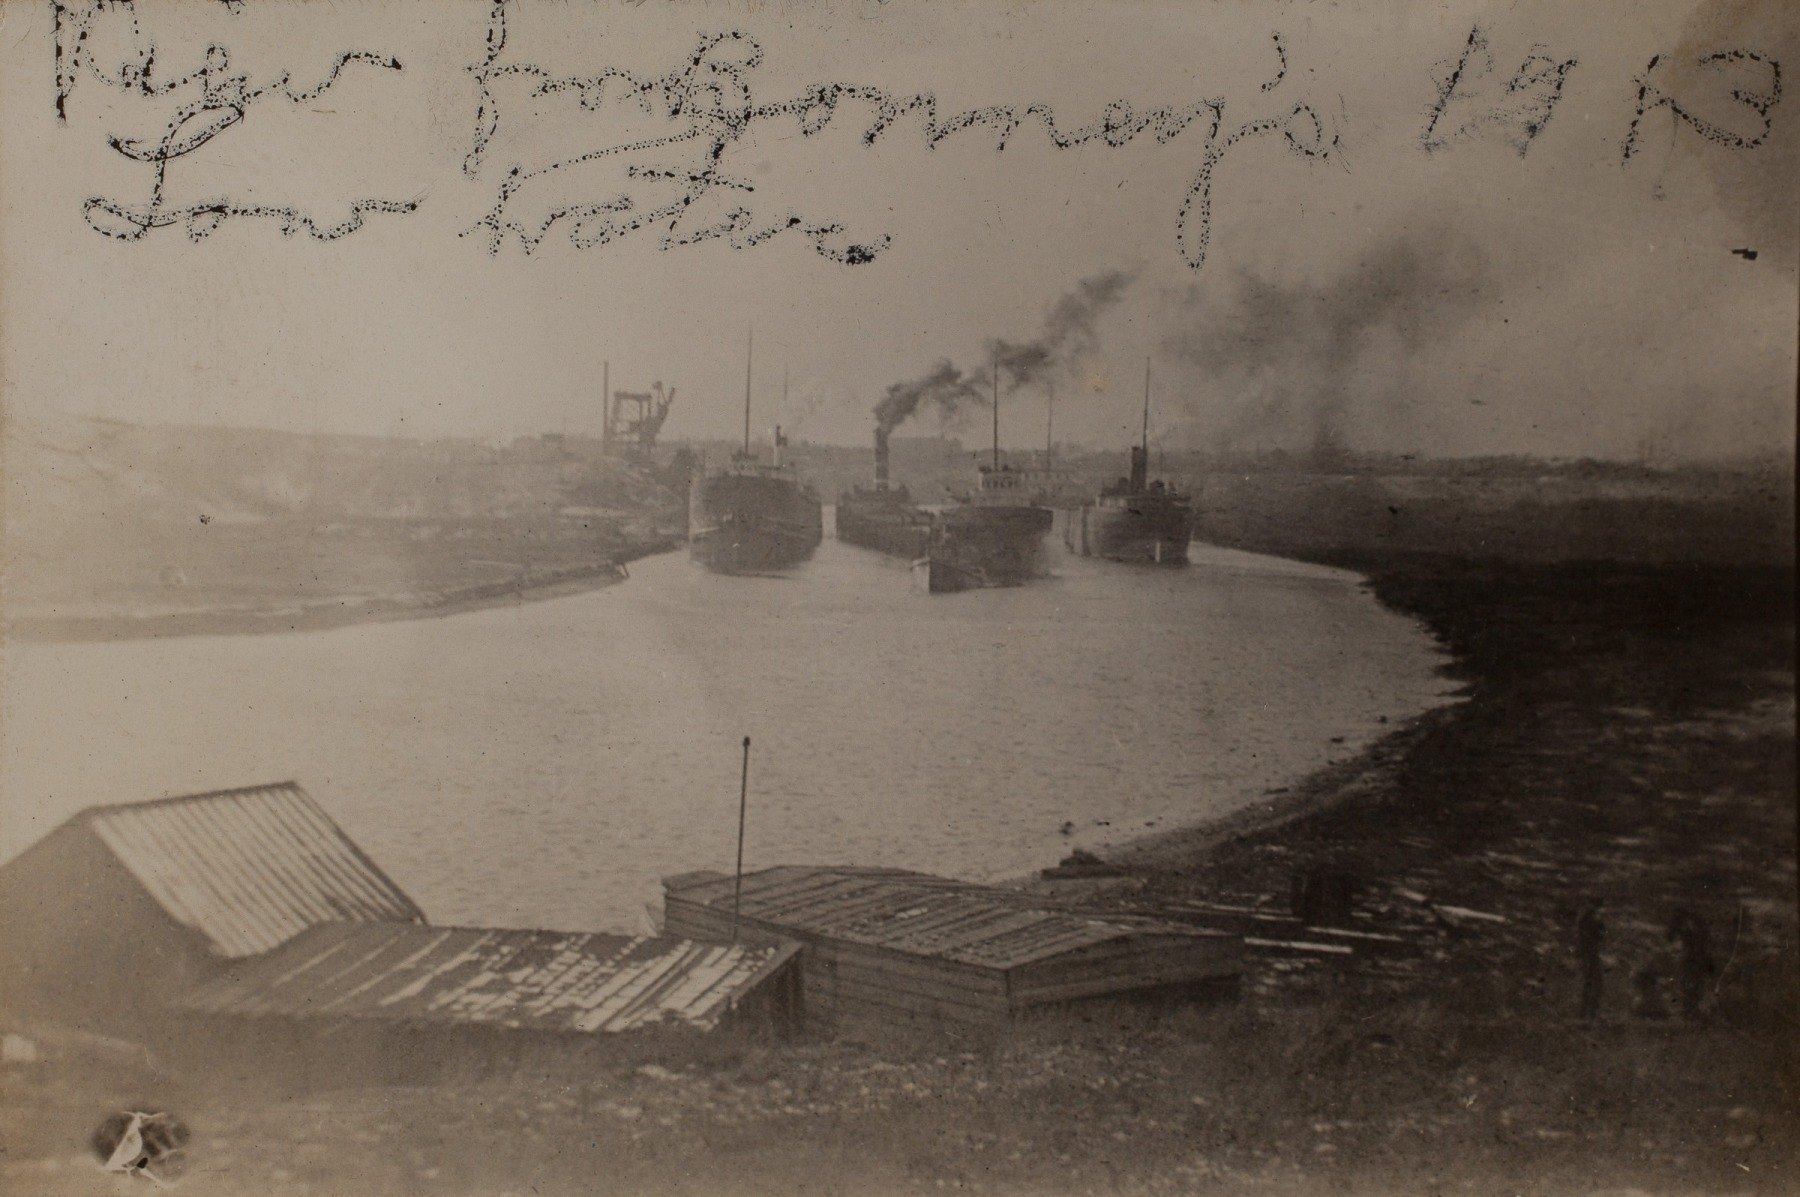 1913 "View from Bonney's 1913 Low Water" labeled by Nellie B Bonney with 3 people and 4 ship liners spewing smoke.